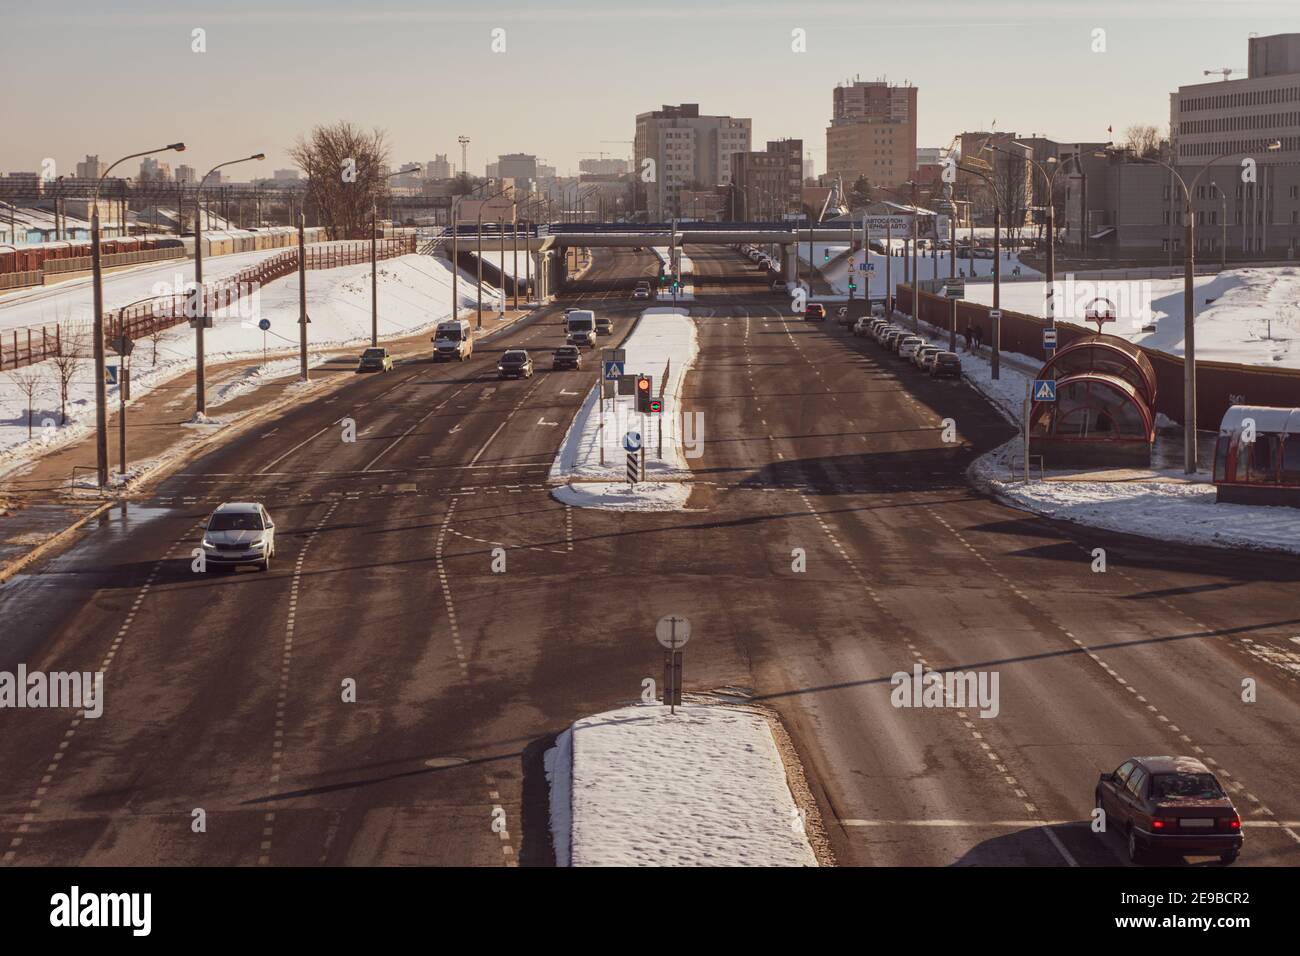 Minsk, Belarus - February 01, 2021: Cars stopped on cross road at a red traffic light and are waiting for a green arrow to turn Stock Photo